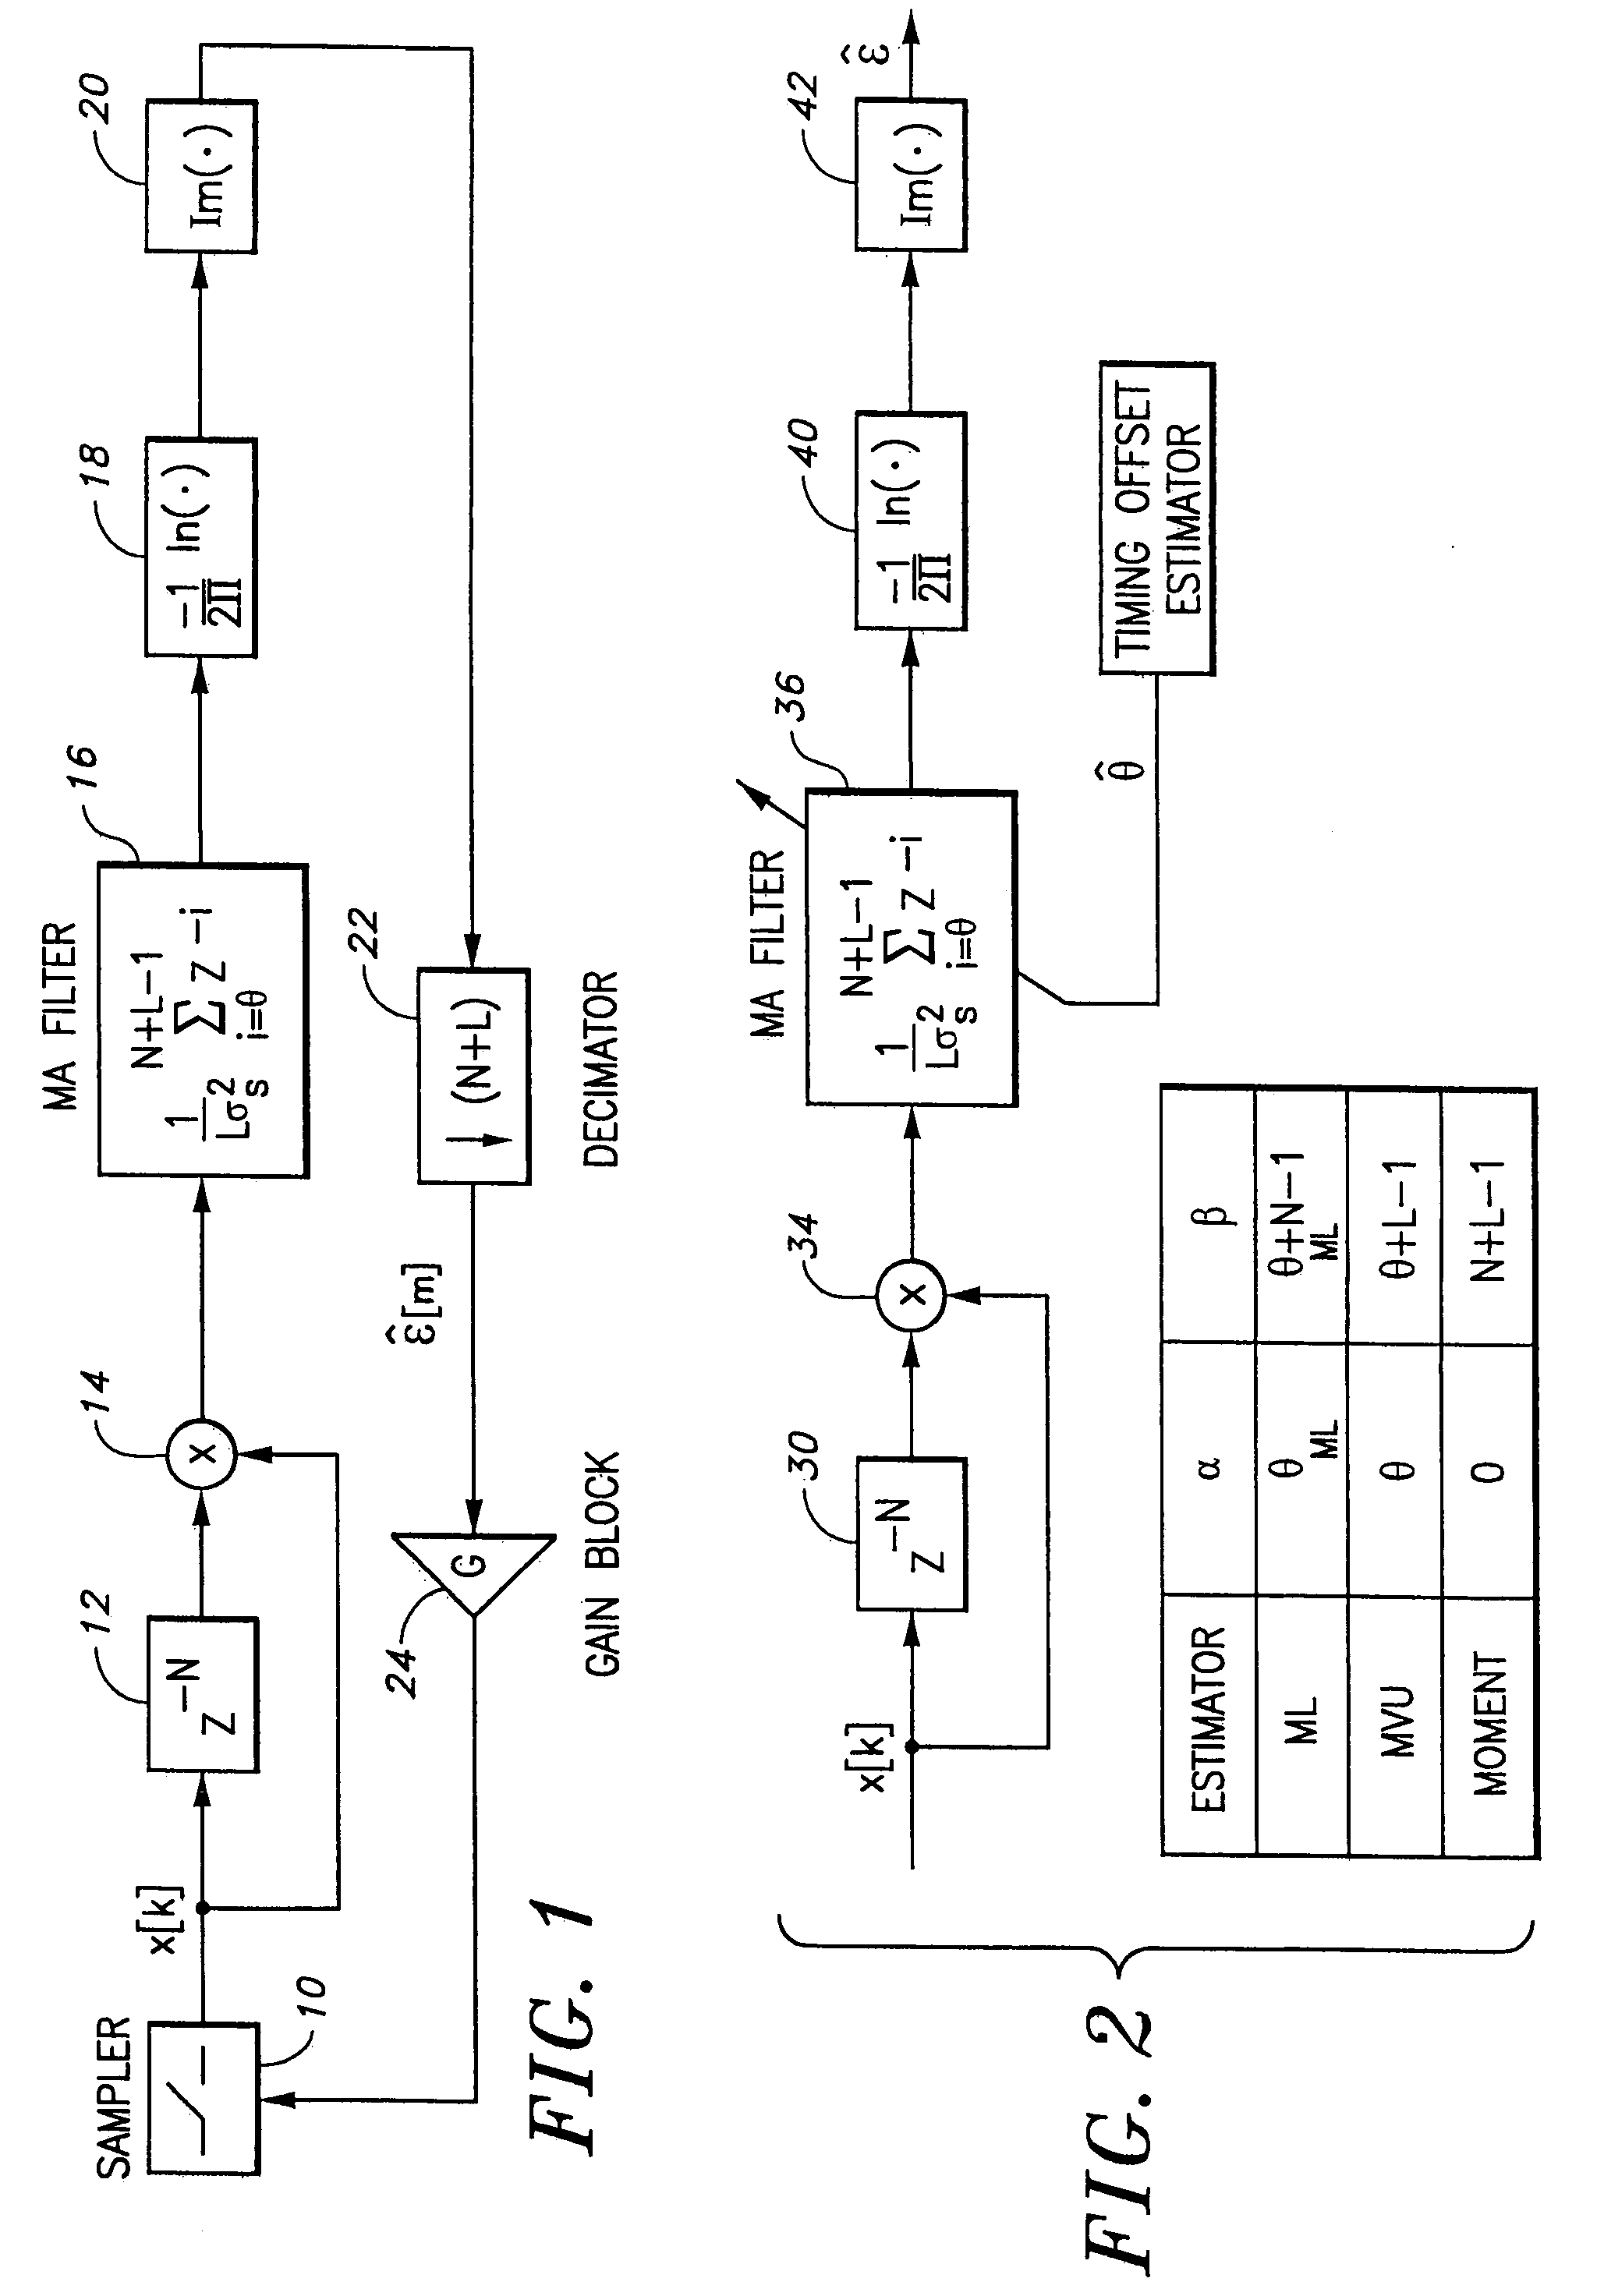 Minimum variance unbiased and moment estimators of carrier frequency offset in multi-carrier systems